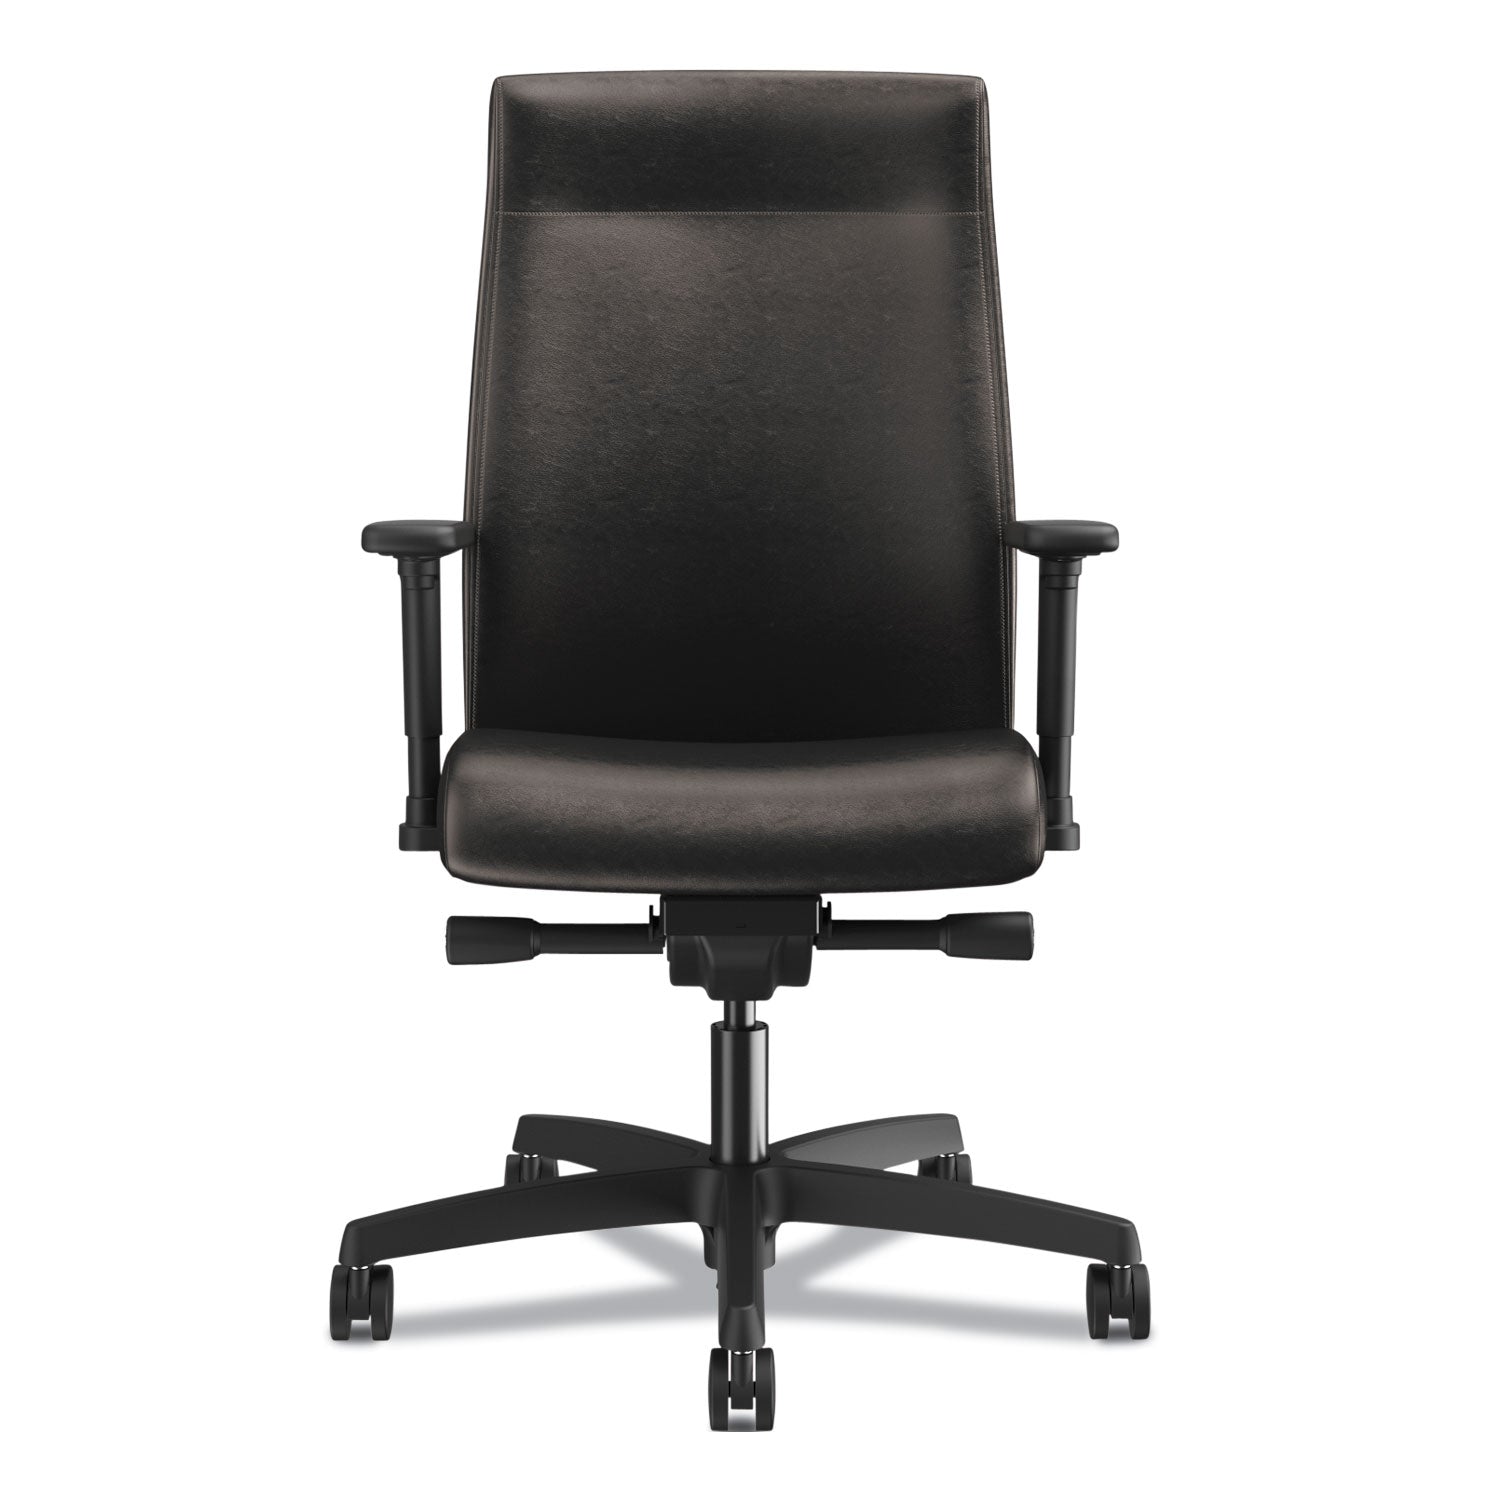 ignition-20-upholstered-mid-back-task-chair-with-lumbar-supports-300-lb-17-to-22-seat-black-vinyl-seat-back-black-base_honi2ul2au10tk - 5